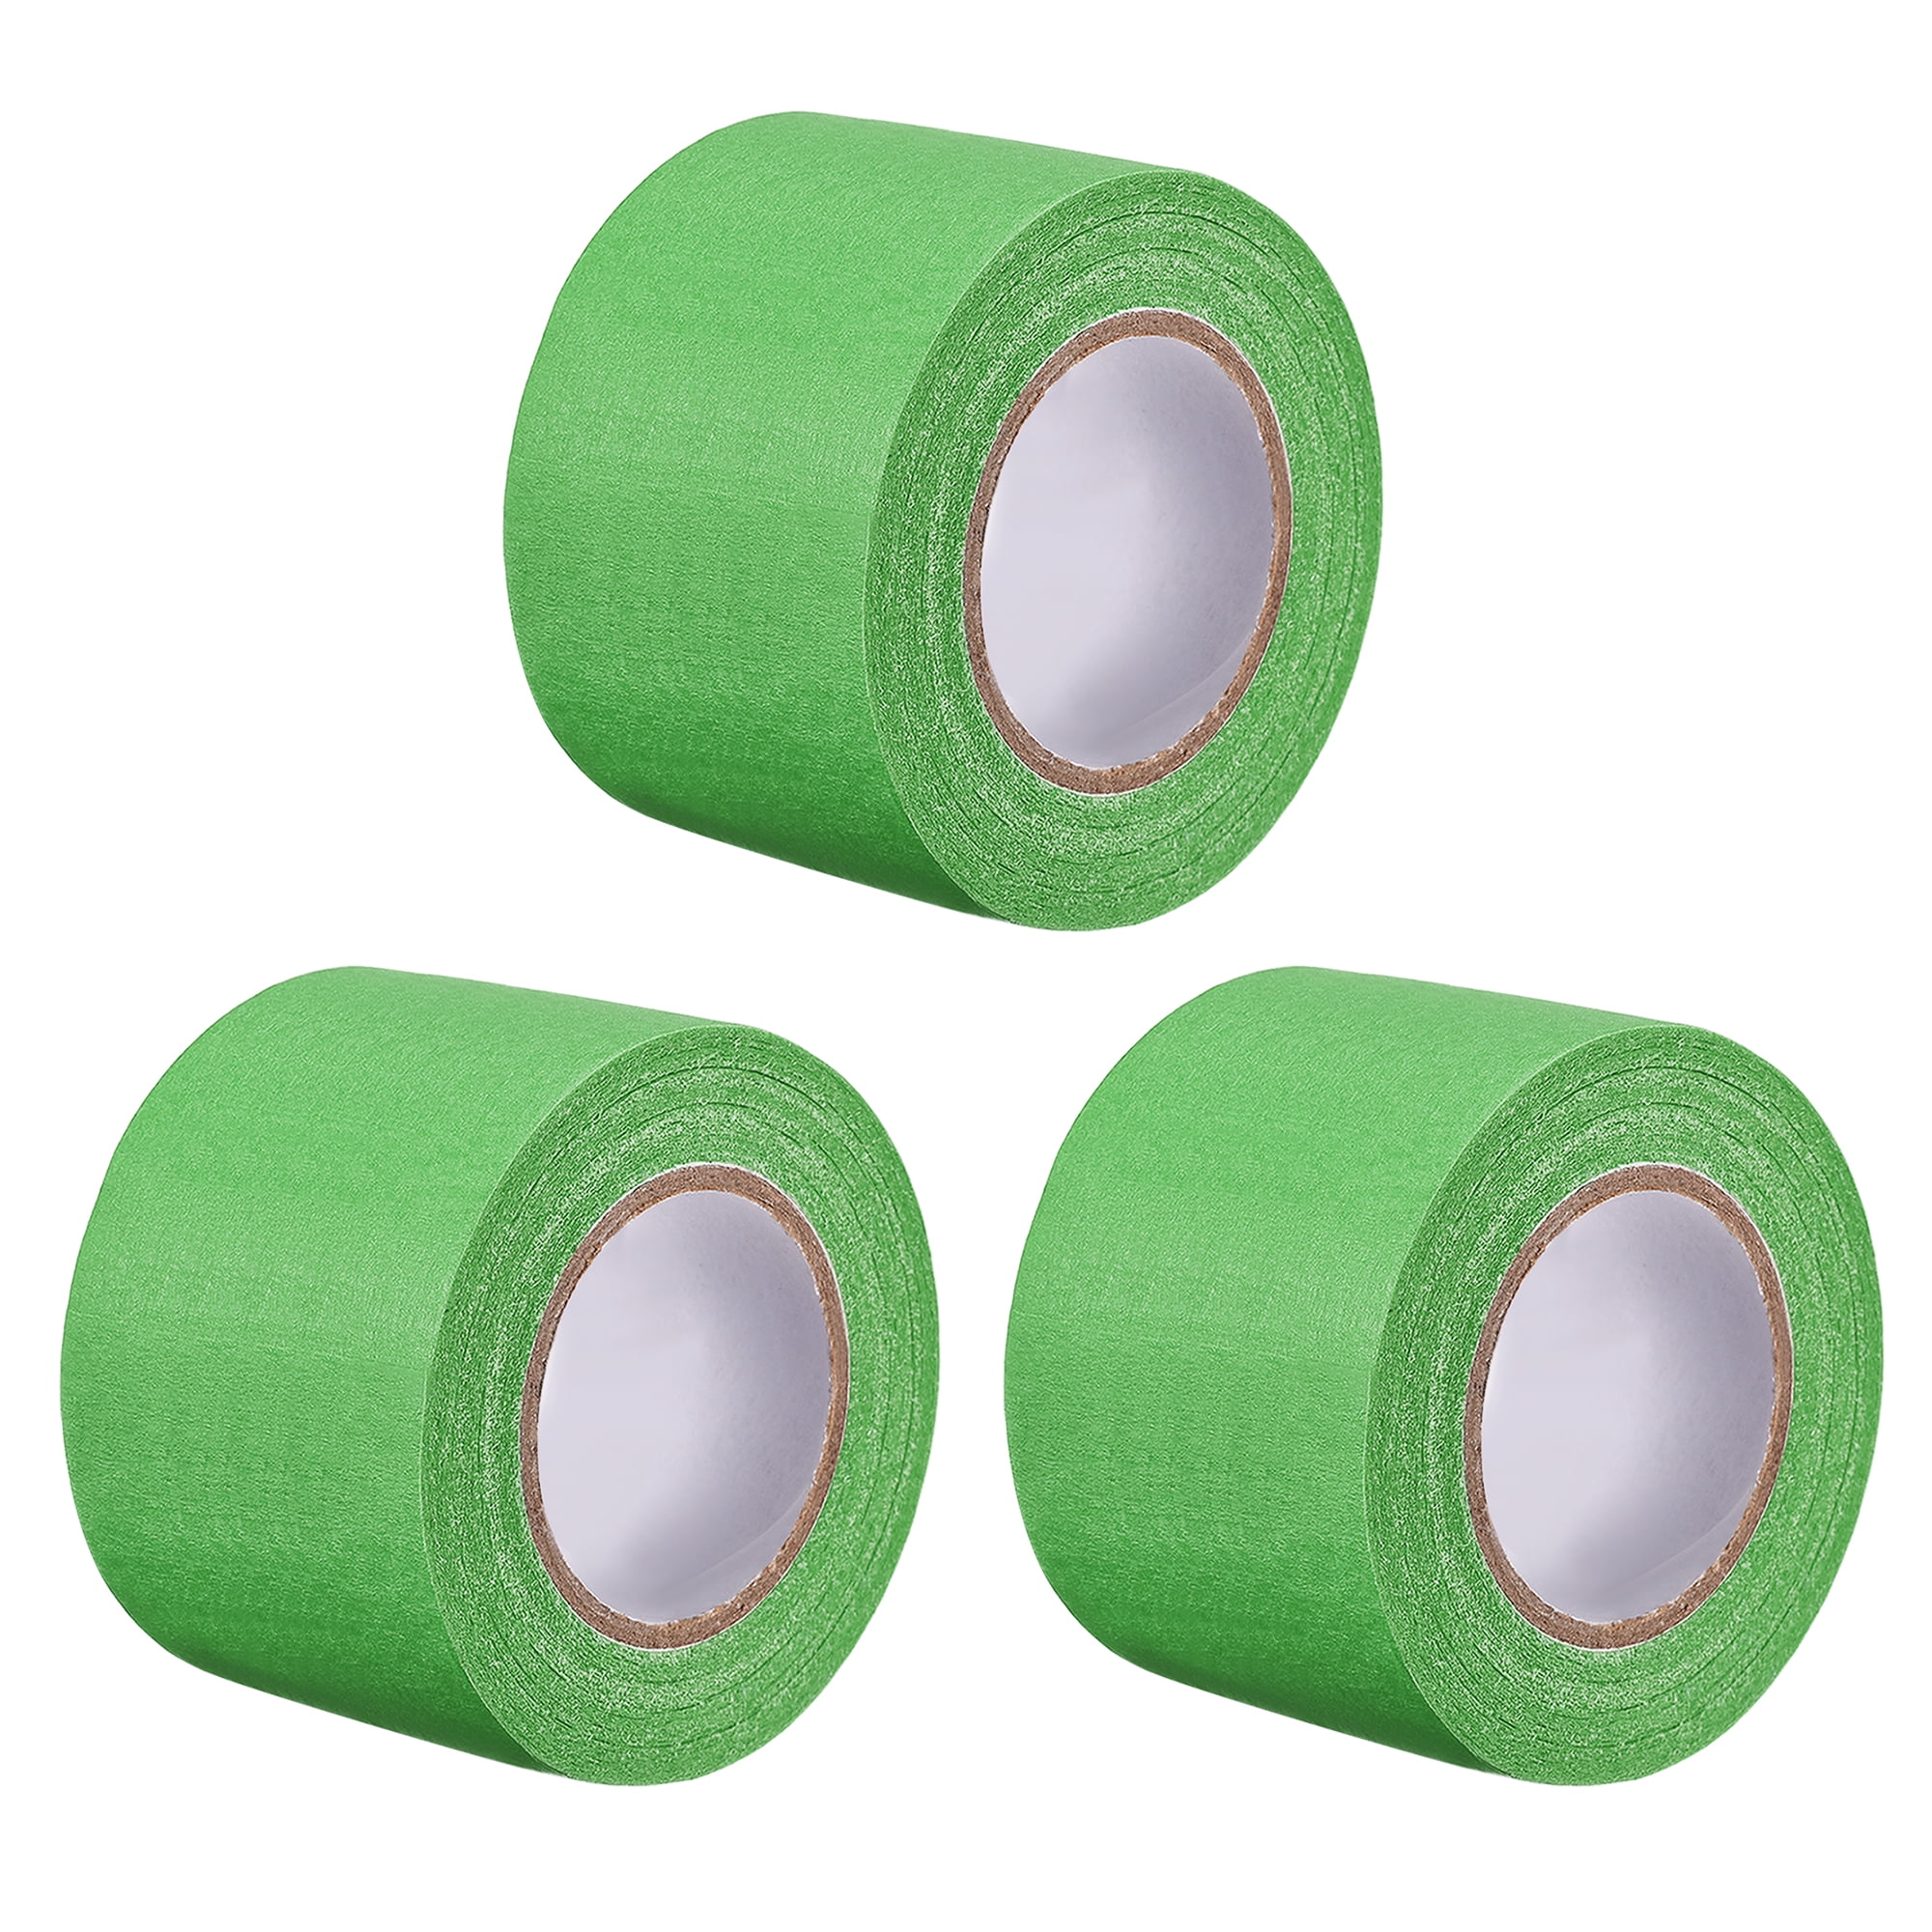 Uxcell 3pcs 30mm 1.2 inch Wide 20m 21 Yards Masking Tape Painters Tape Rolls Light Green, Size: 30mm x 20M, Red